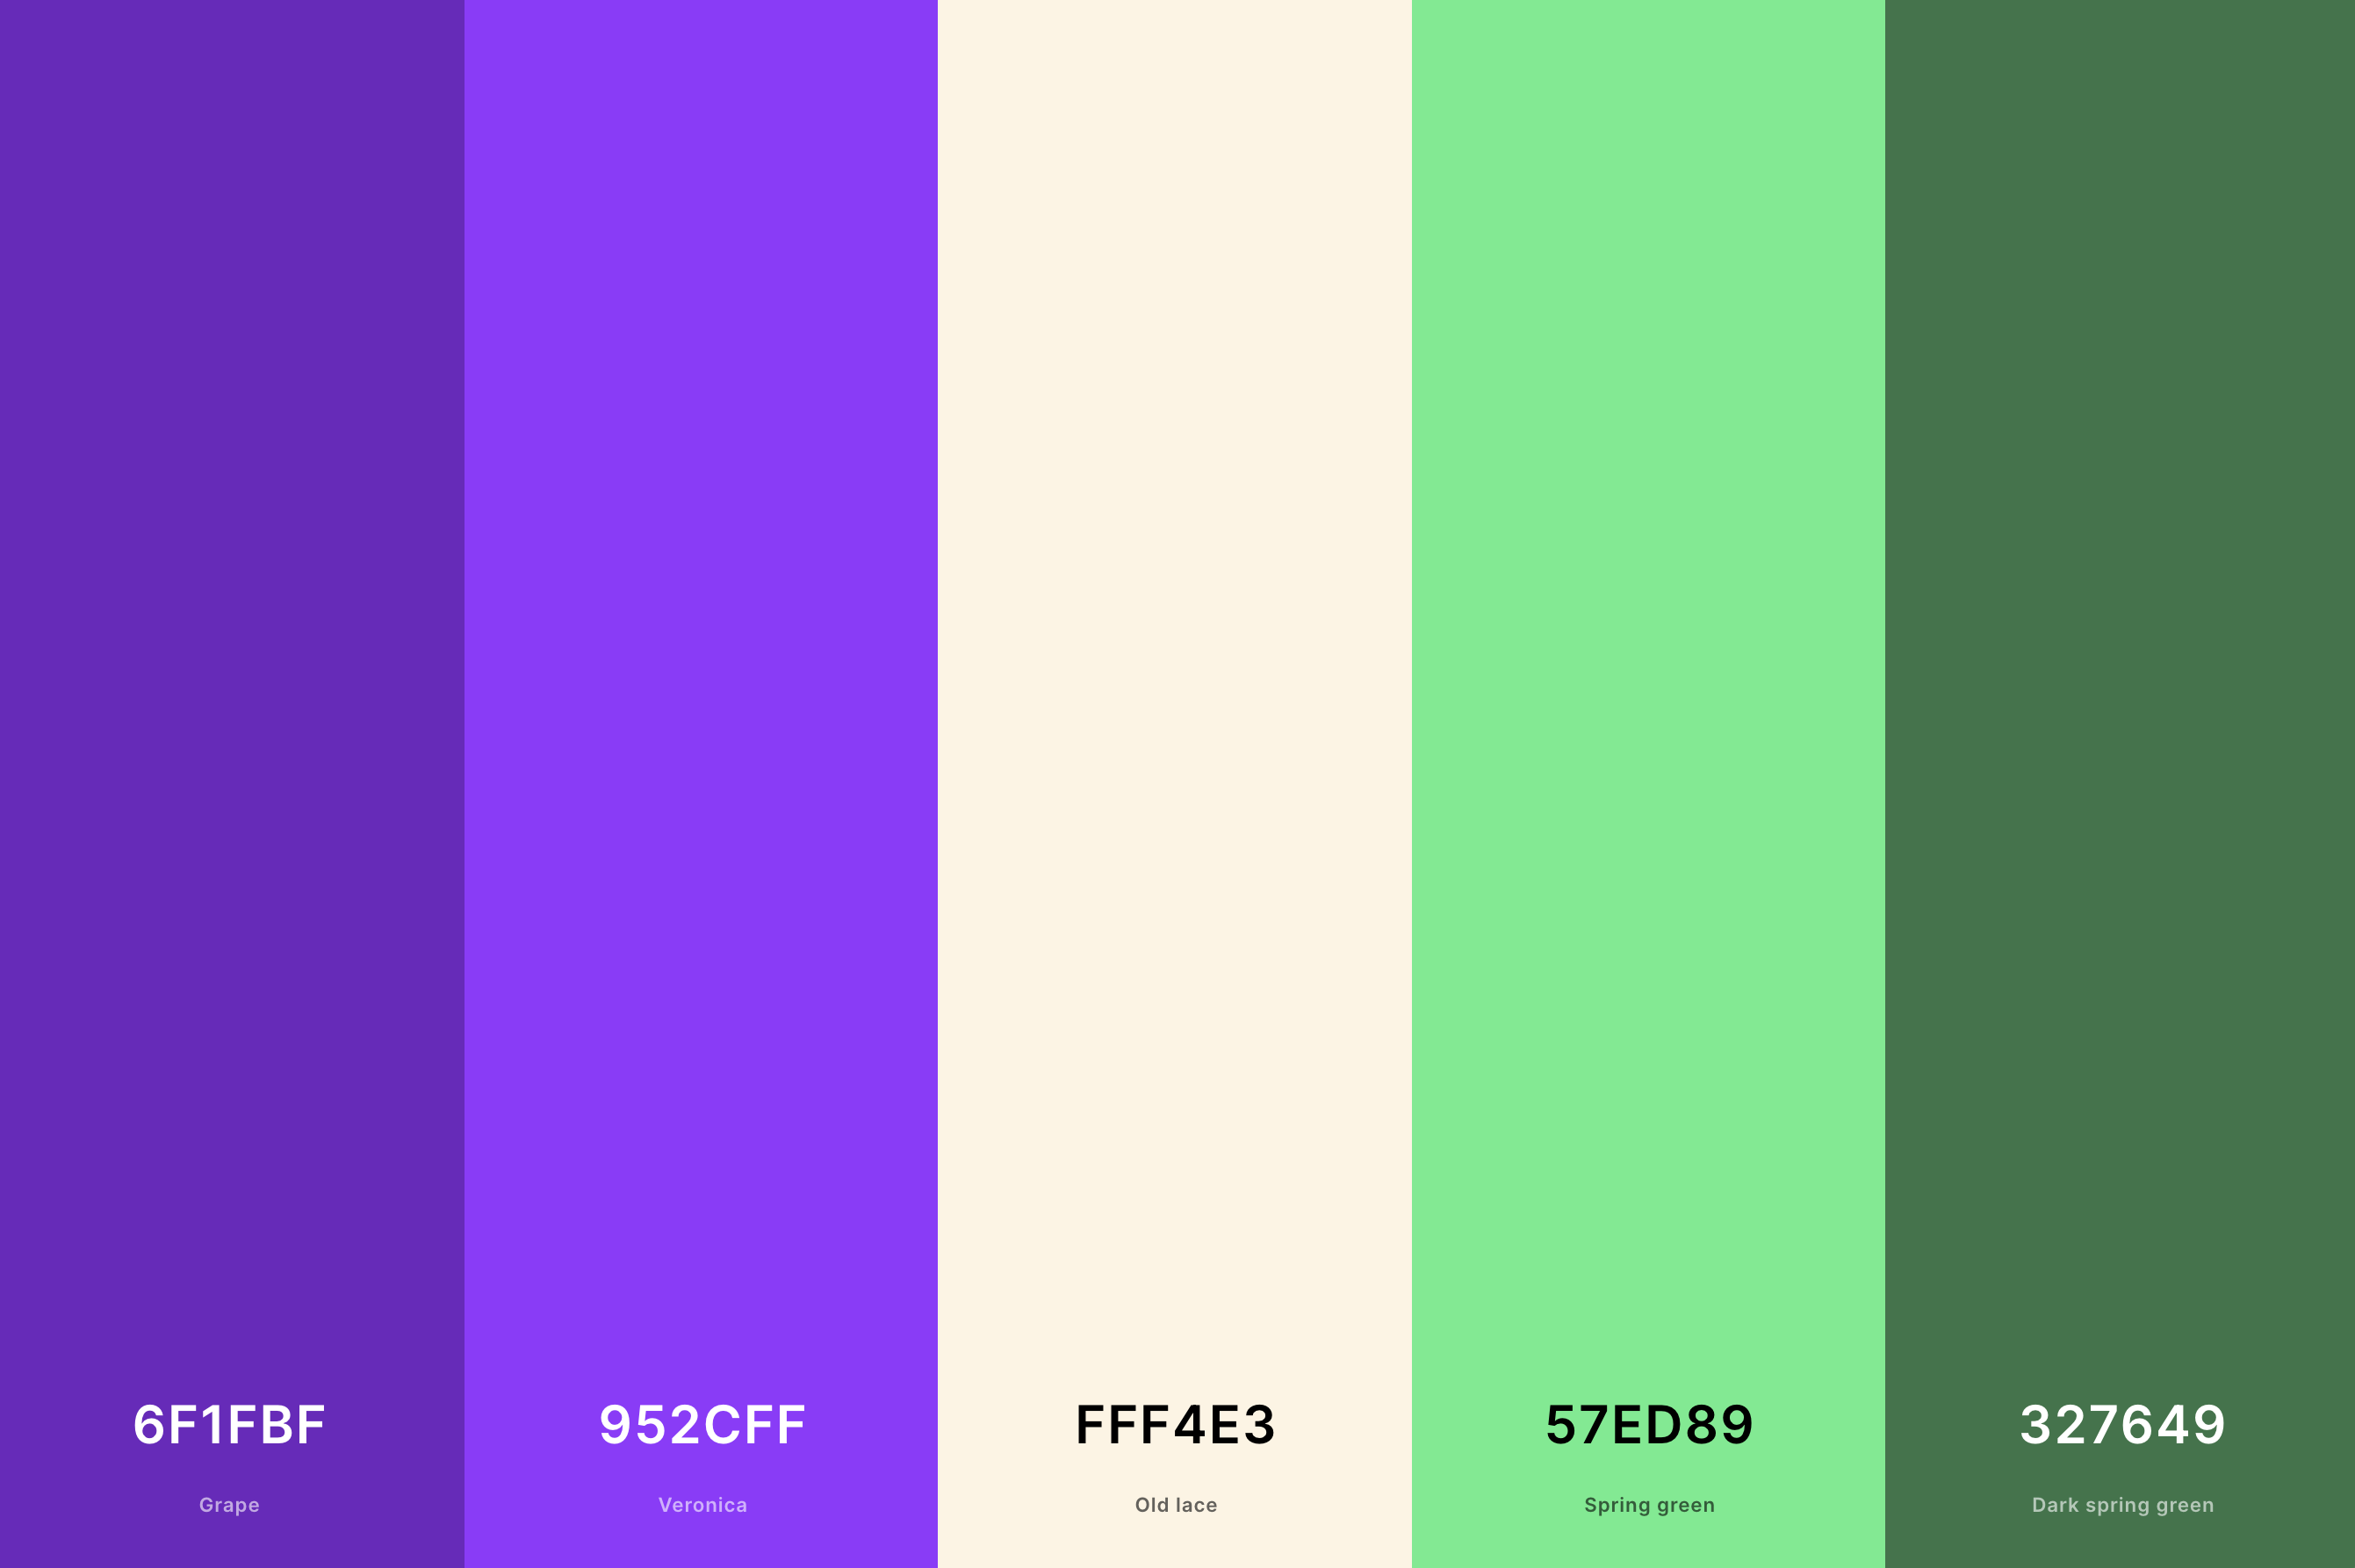 12. Violet And Green Color Palette Color Palette with Grape (Hex #6F1FBF) + Veronica (Hex #952CFF) + Old Lace (Hex #FFF4E3) + Spring Green (Hex #57ED89) + Dark Spring Green (Hex #327649) Color Palette with Hex Codes